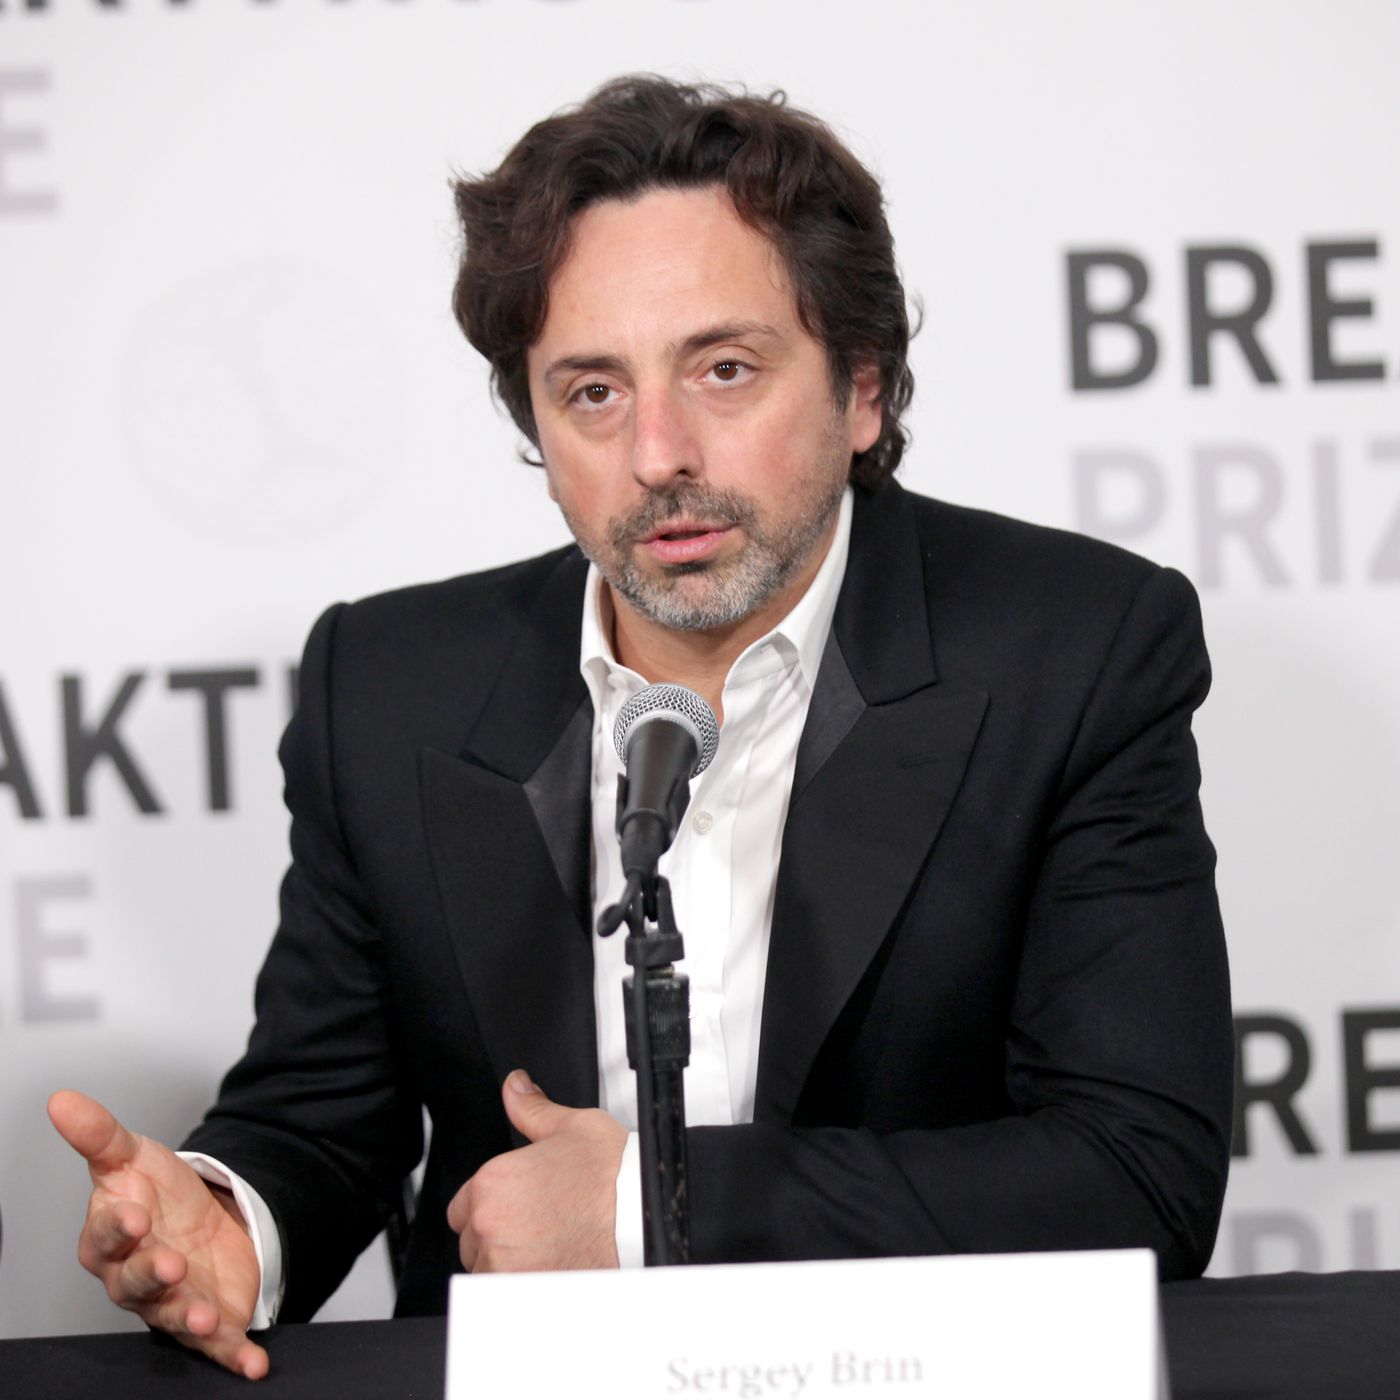 Google's Sergey Brin warns of the threat from AI in today's